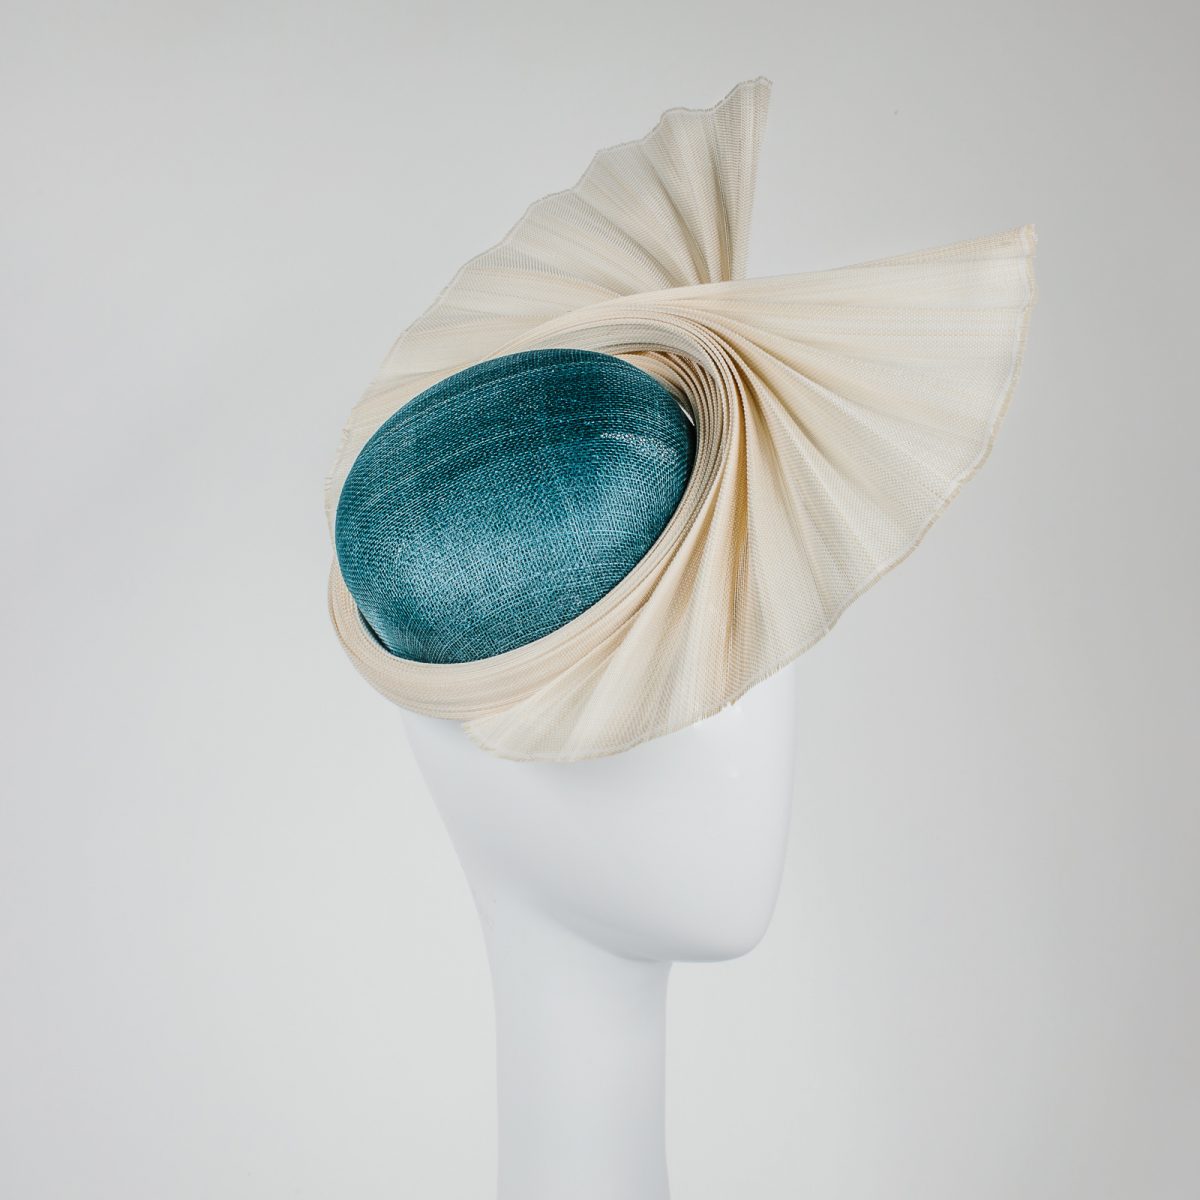 colour combinations for millinery - custom made hat